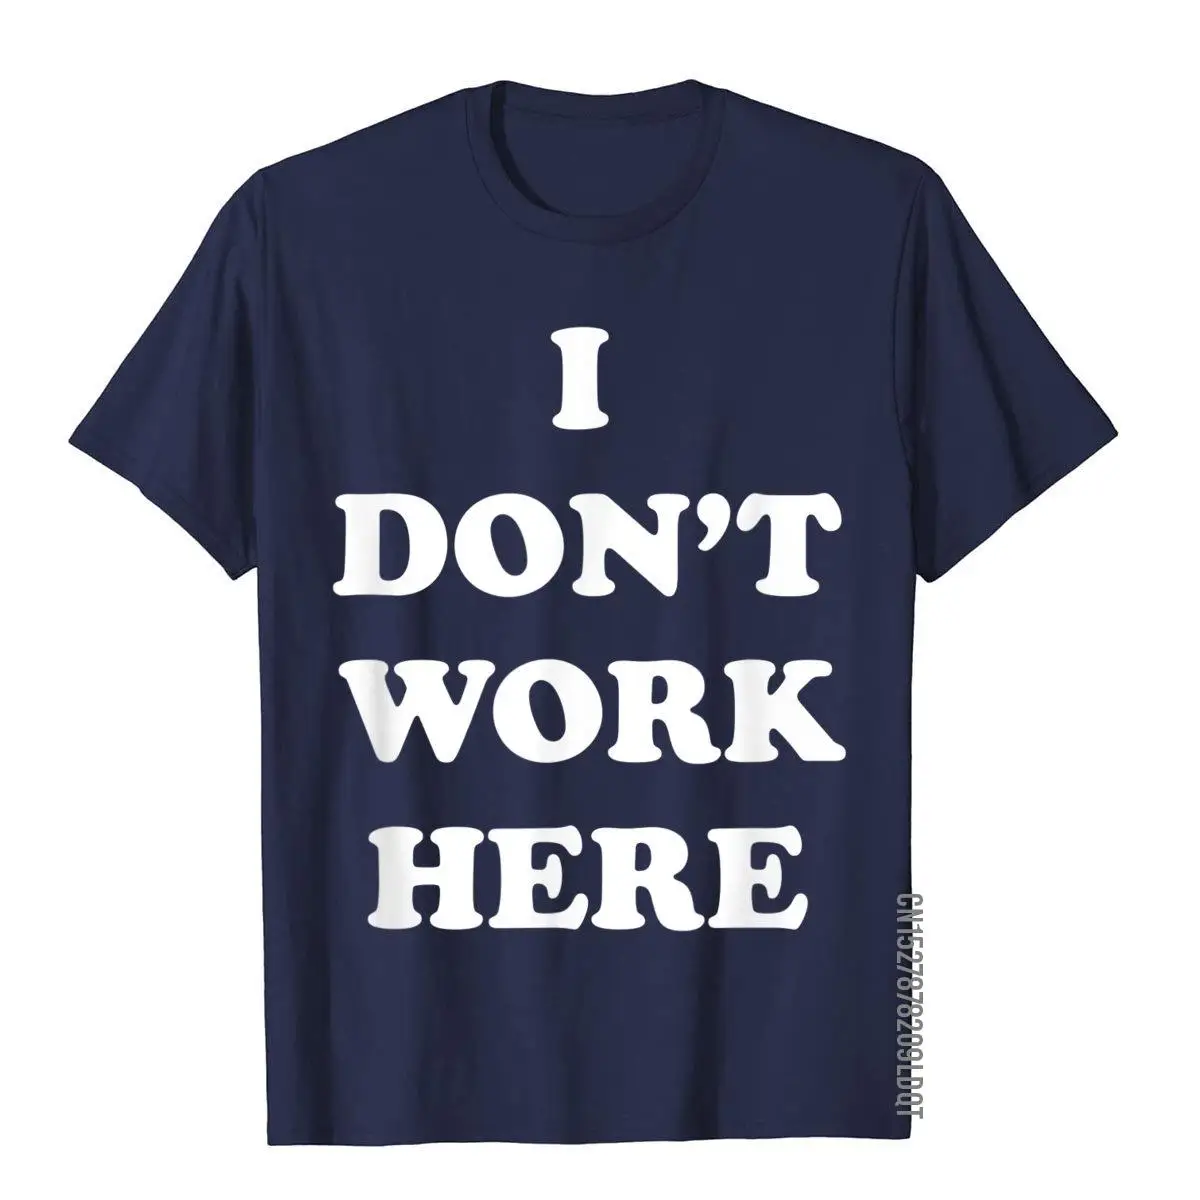 I Don't Work Here Funny Tee Shirt__B11373navy